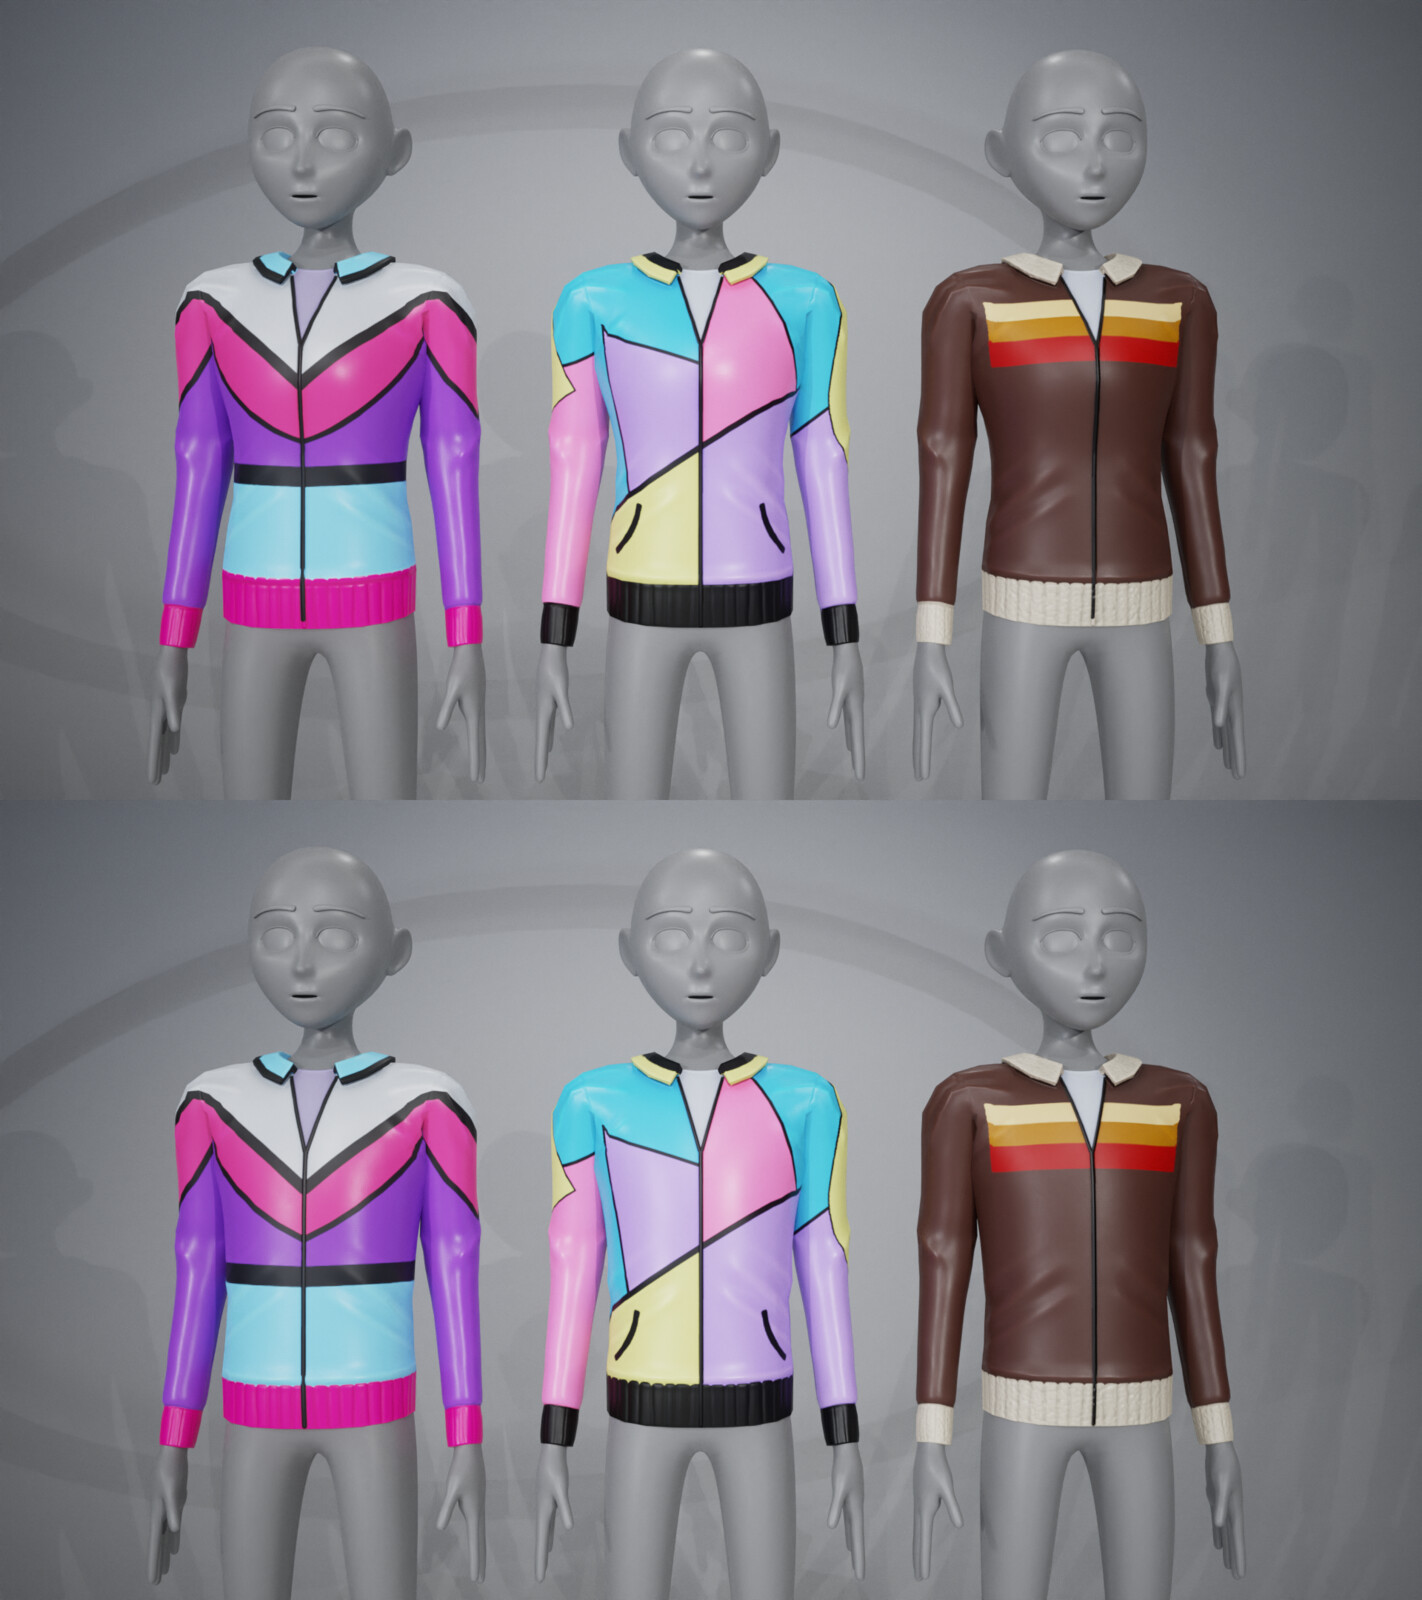 S02 - Jackets (90's, 80's, 70's)